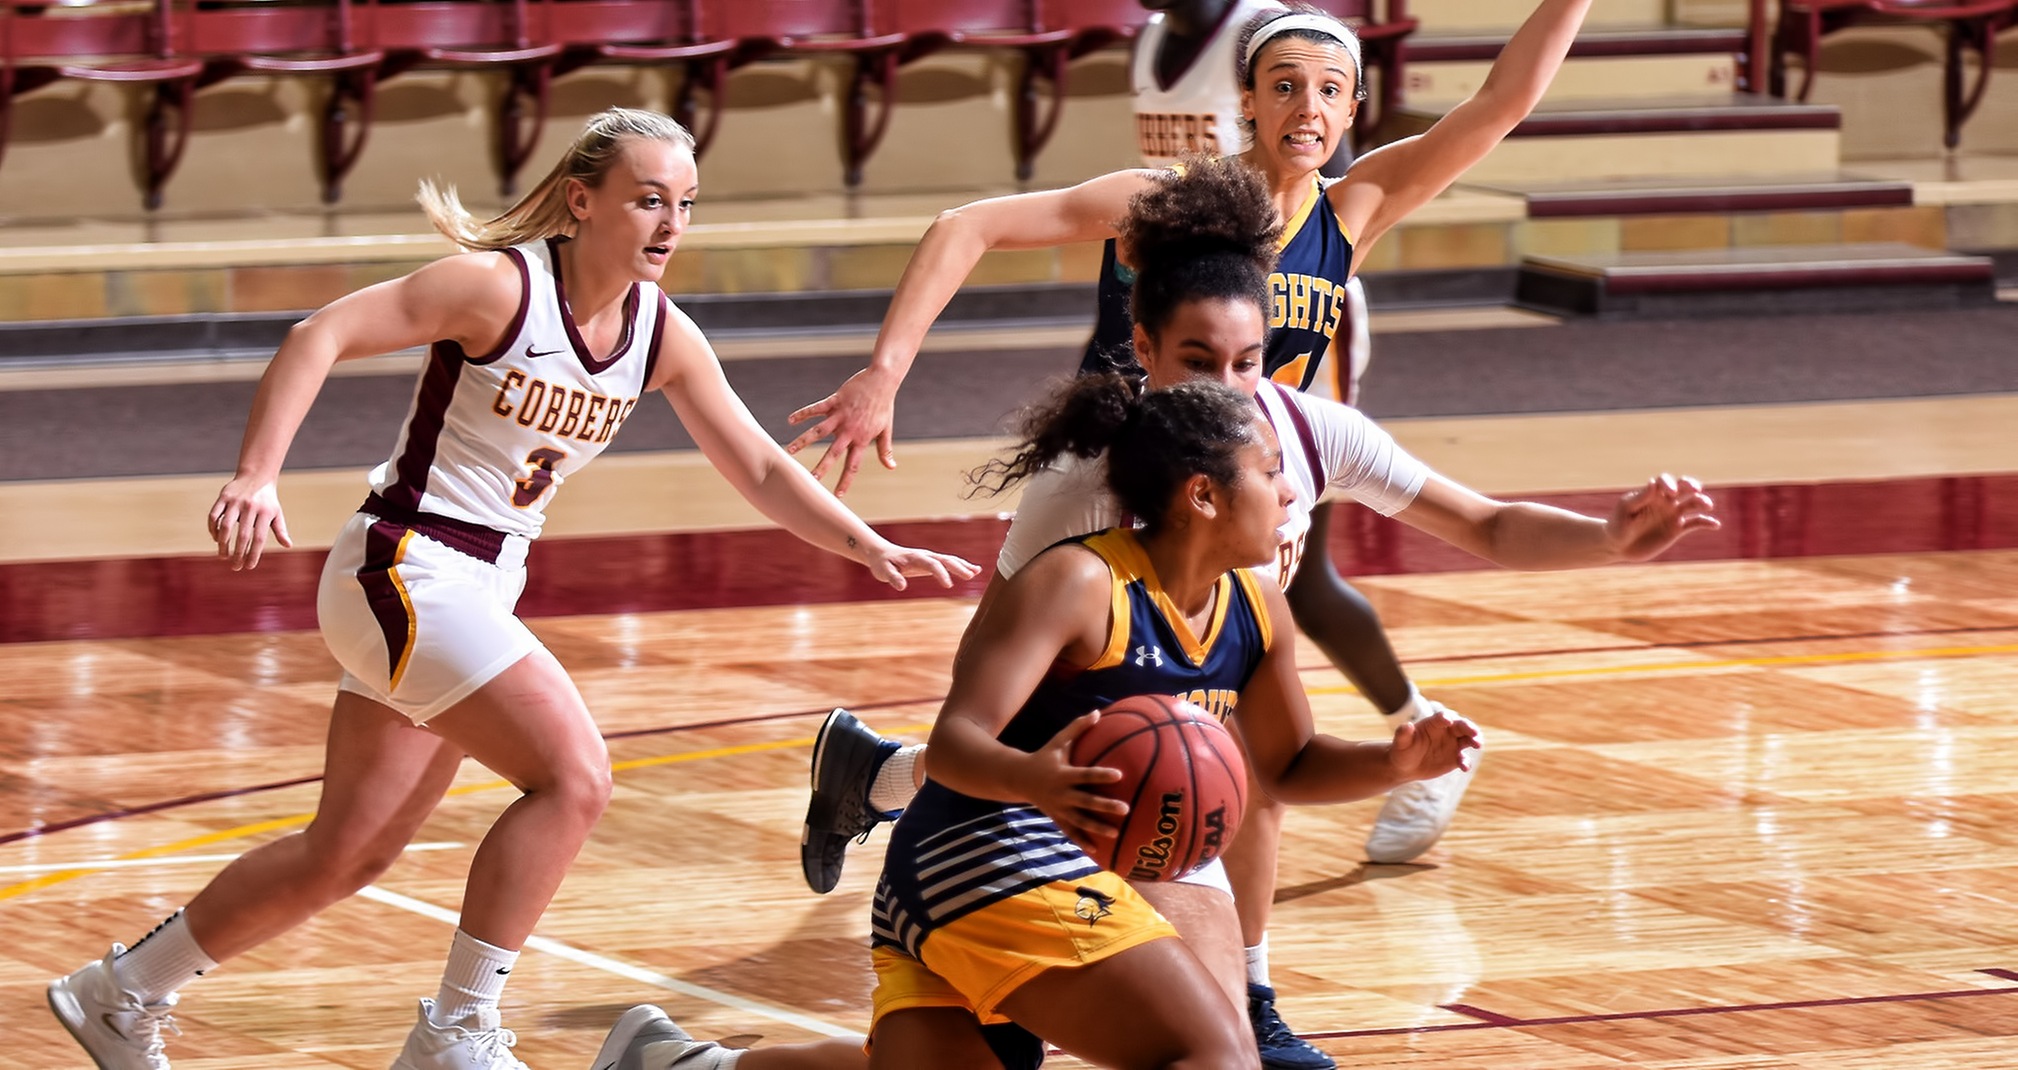 Concordia battled Carleton through a game that featured 10 tie scores and 11 lead changes but lost 53-50 in Northfield.